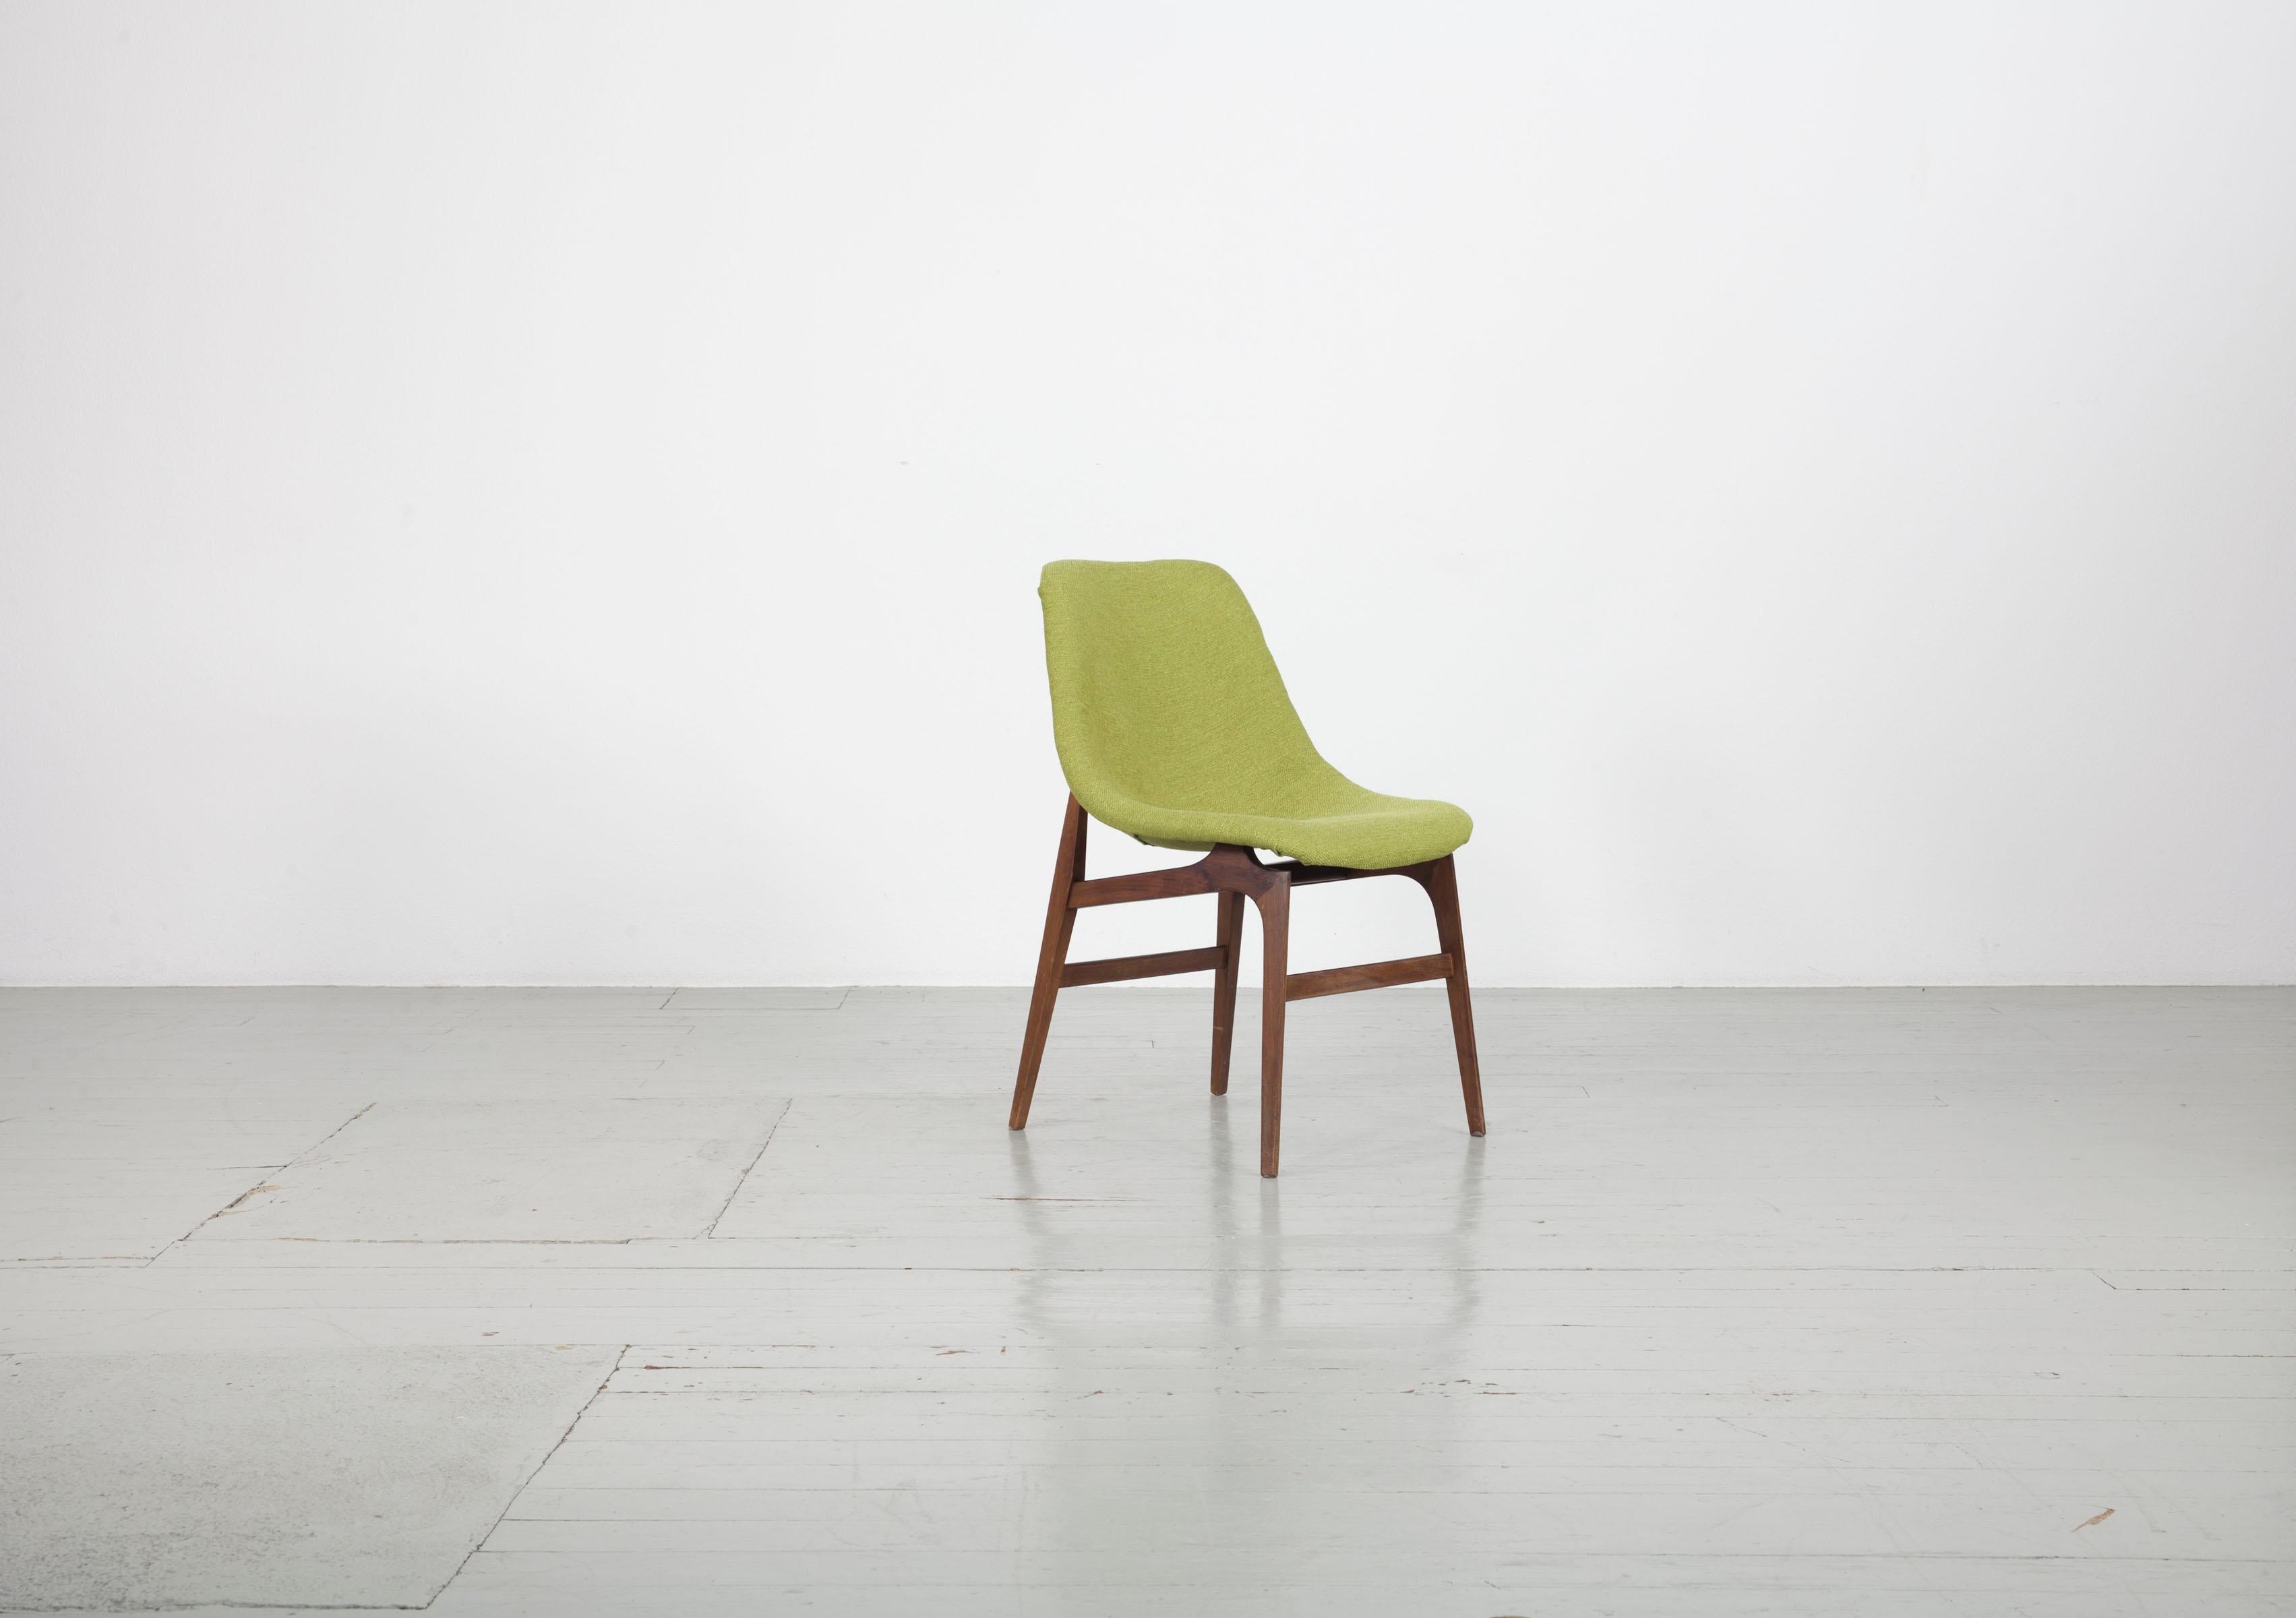 The set of four chairs was made in Italy in the 1960s and marketed by the company Busnelli di Meda. A label with this name is attached to the teak frame. The sturdy chair frames show signs of previous use. The seat consists of a fibreglass shell